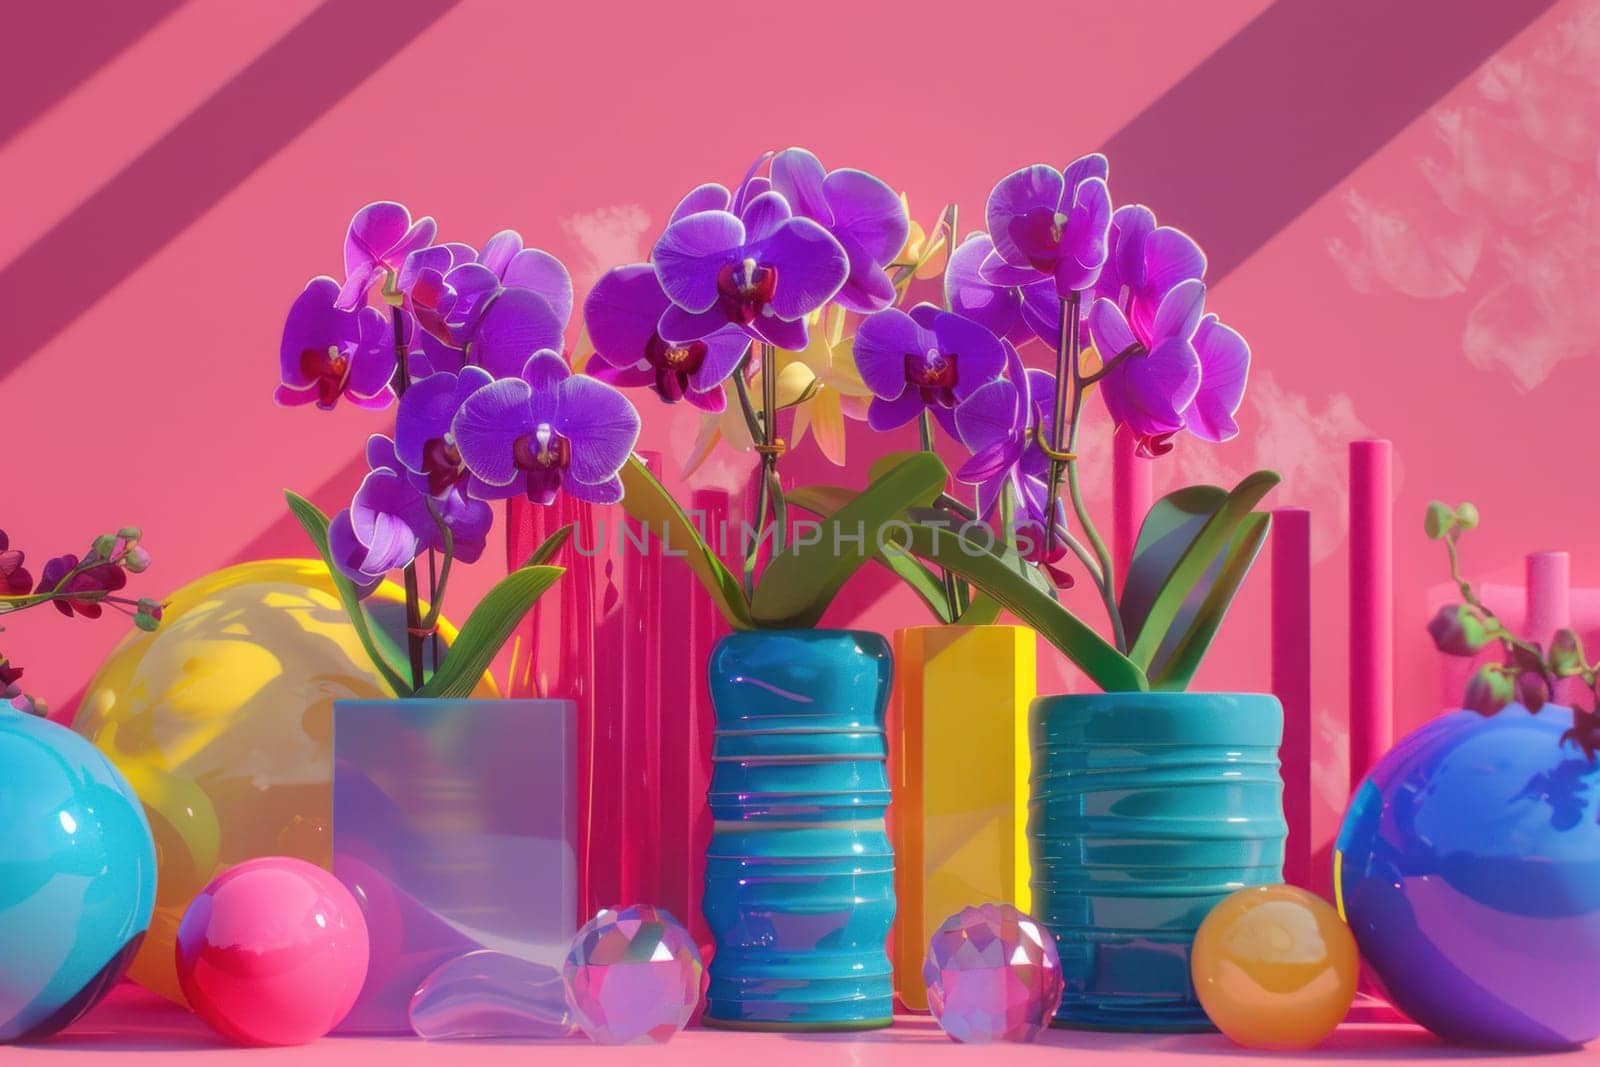 Purple flowers in vase and objects on pink background, still life composition for beauty or art concept